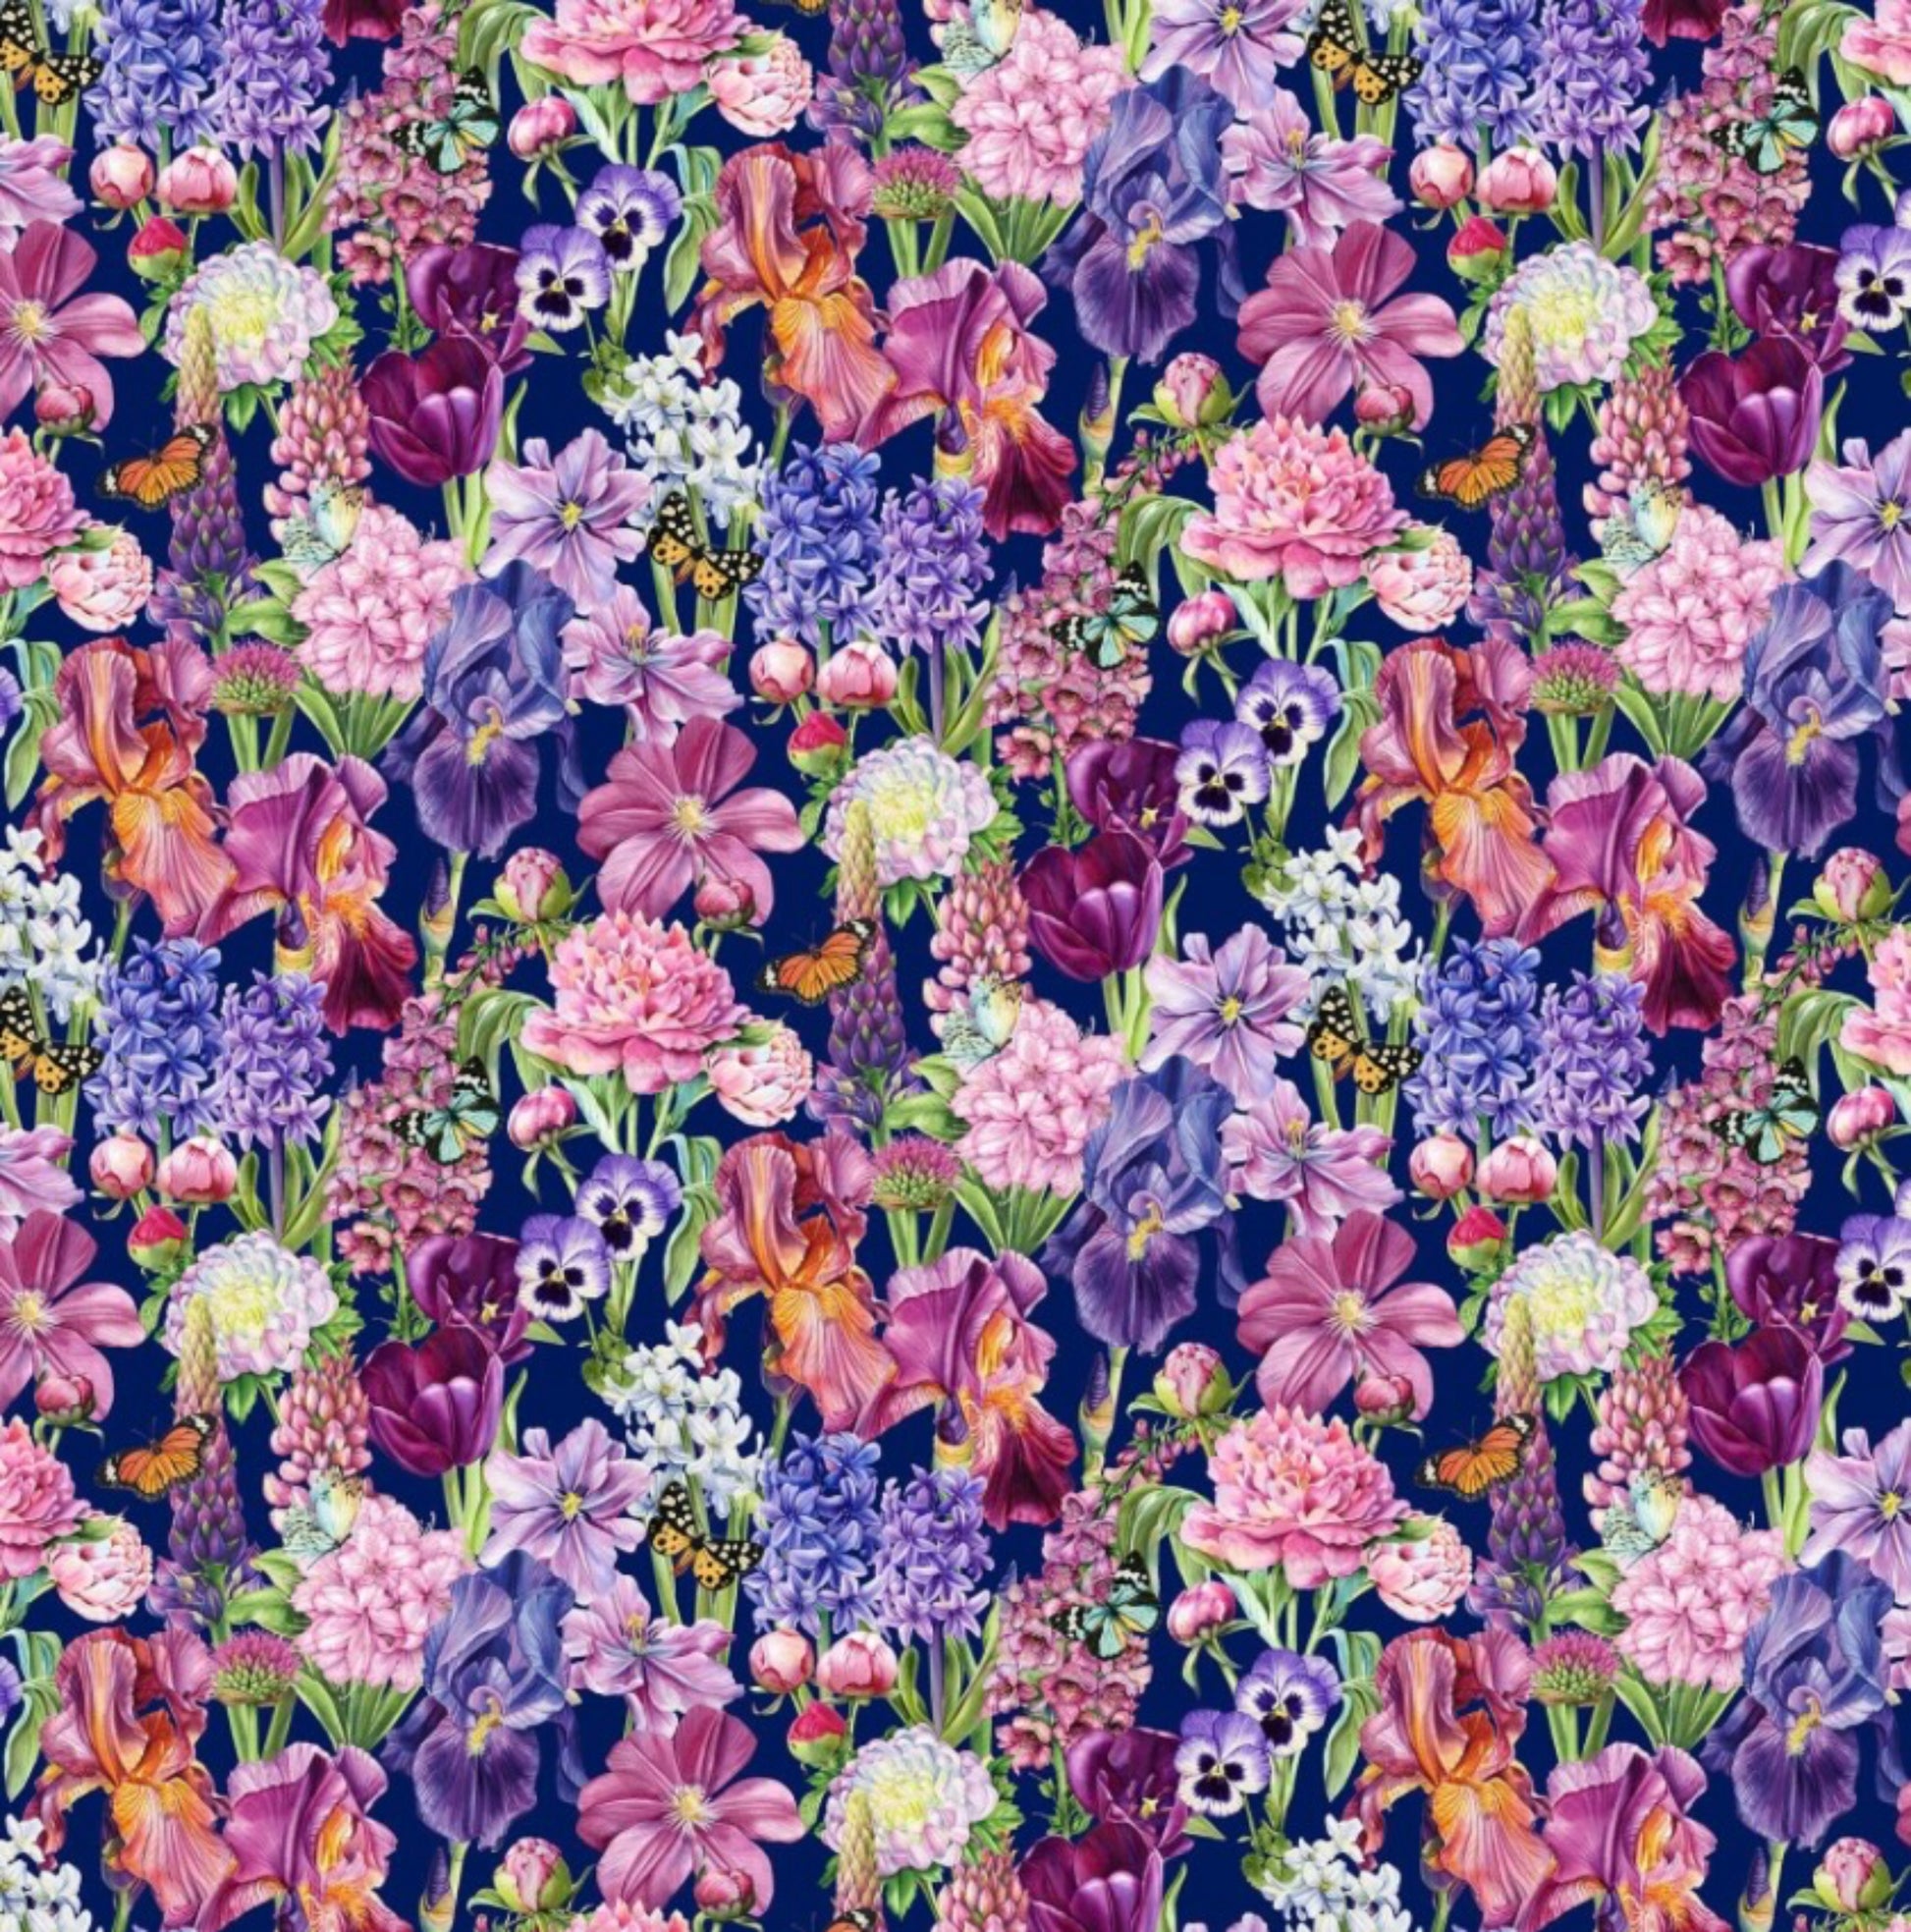 Large Packed Floral Fabric in Navy from Deborah's Garden collection by Michel Design Works for Northcott Fabrics